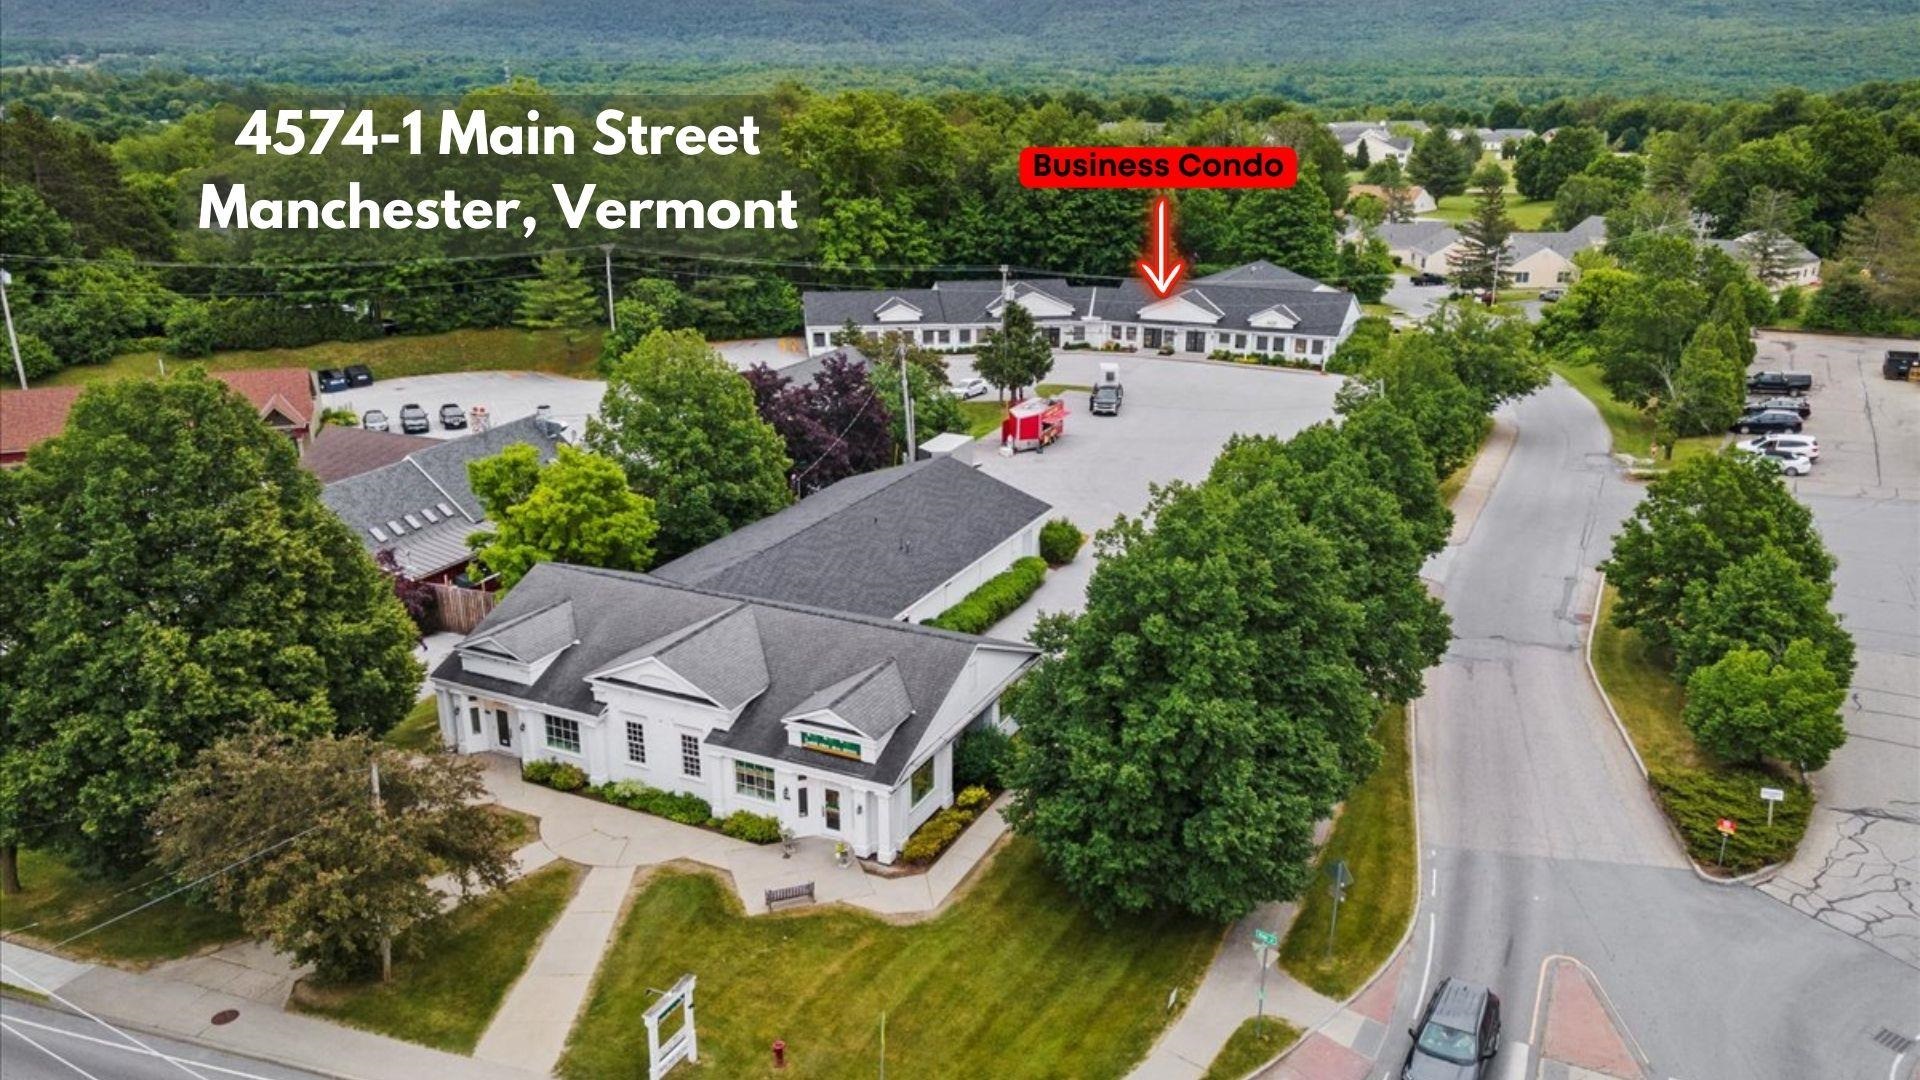 Manchester VT Commercial Property for sale $449,000 